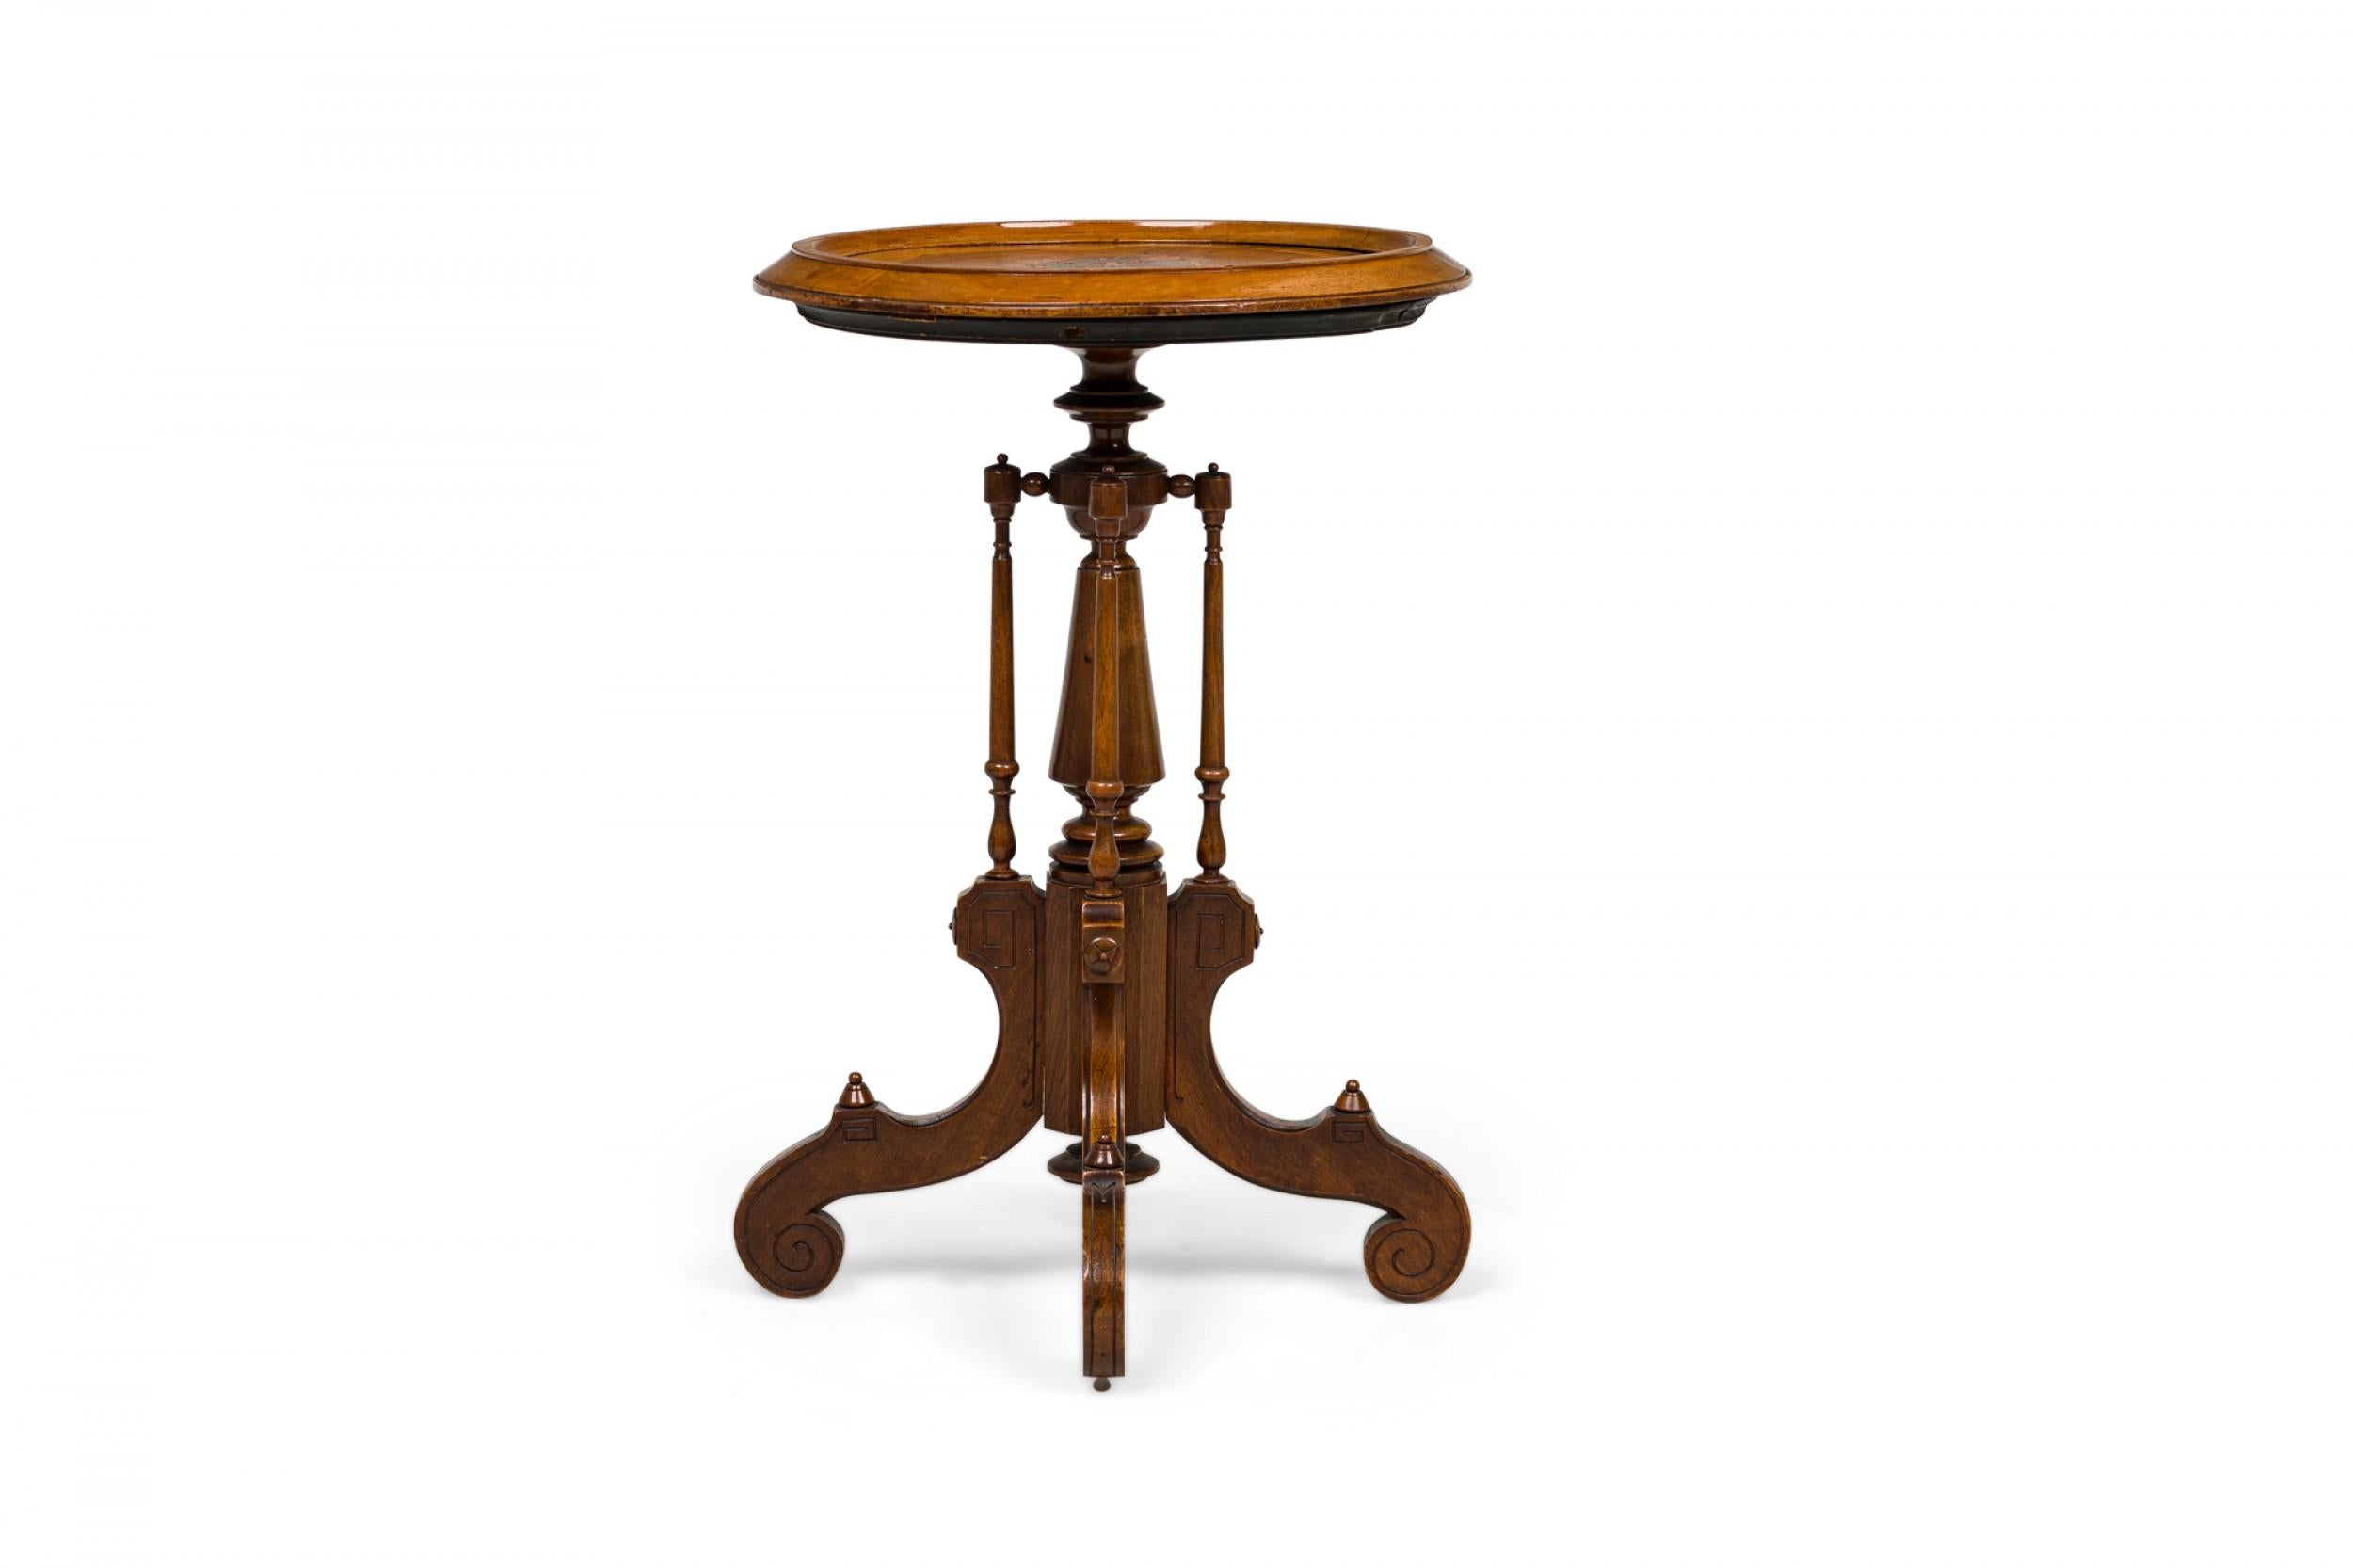 American Victorian wooden plant stand / side table with circular top featuring a central inlaid medallion design, resting on a pedestal base with a central turned post, ending in 4 perpendicular flattened carved legs with scroll feet.